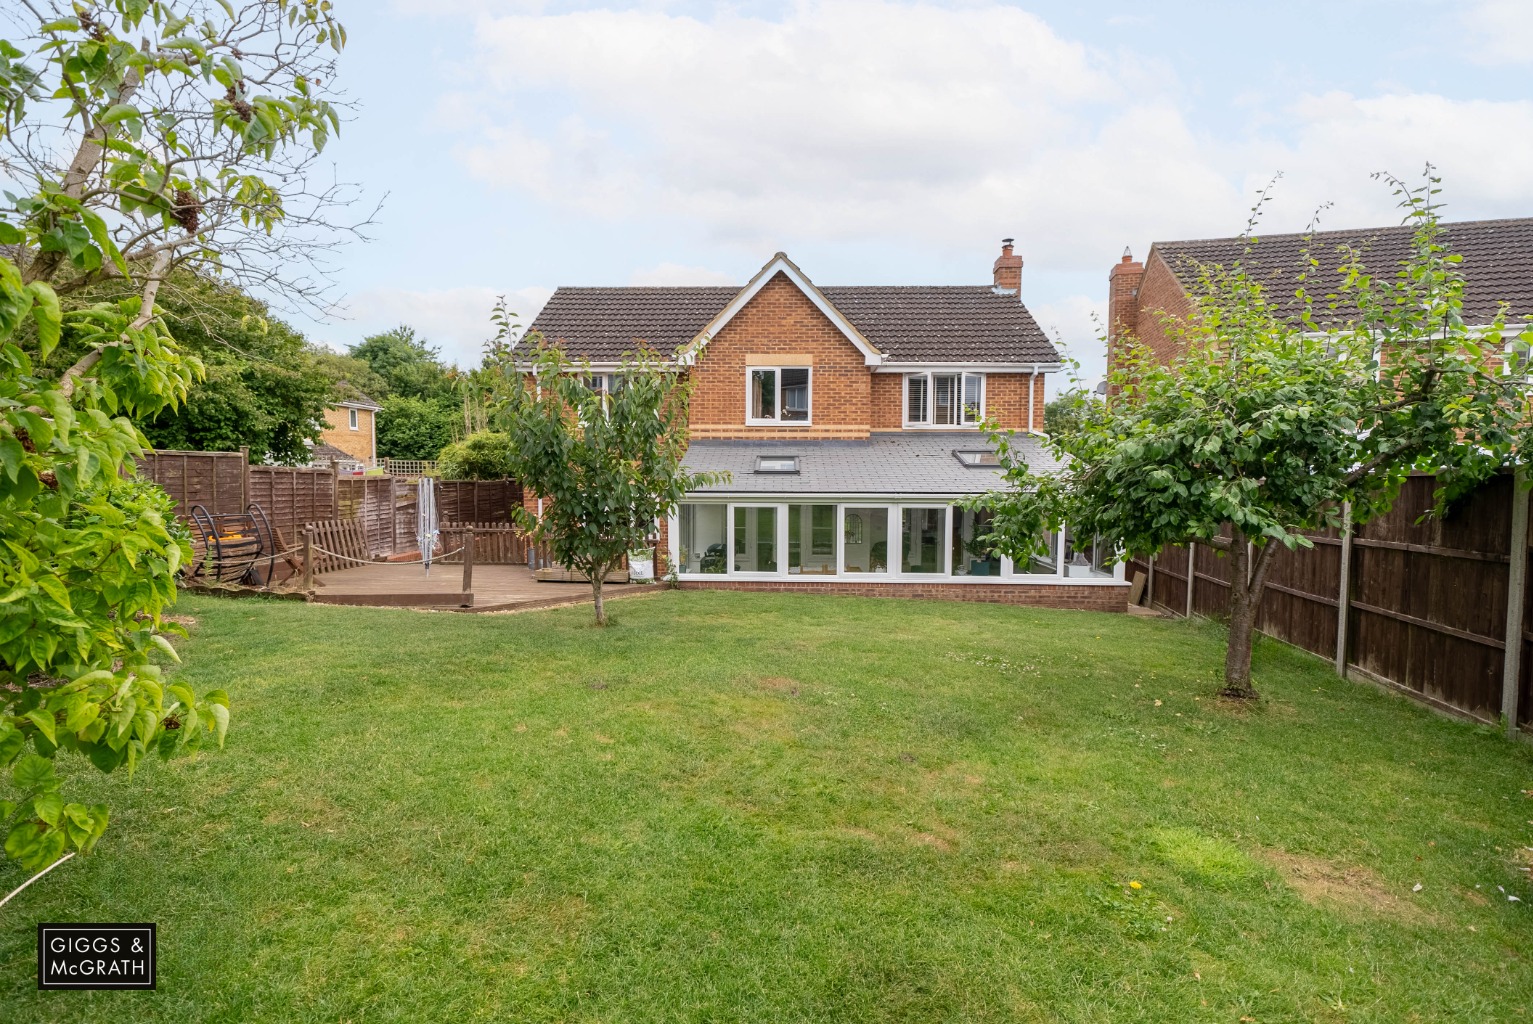 5 bed detached house for sale in Hut Field Lane, Cambridge  - Property Image 4